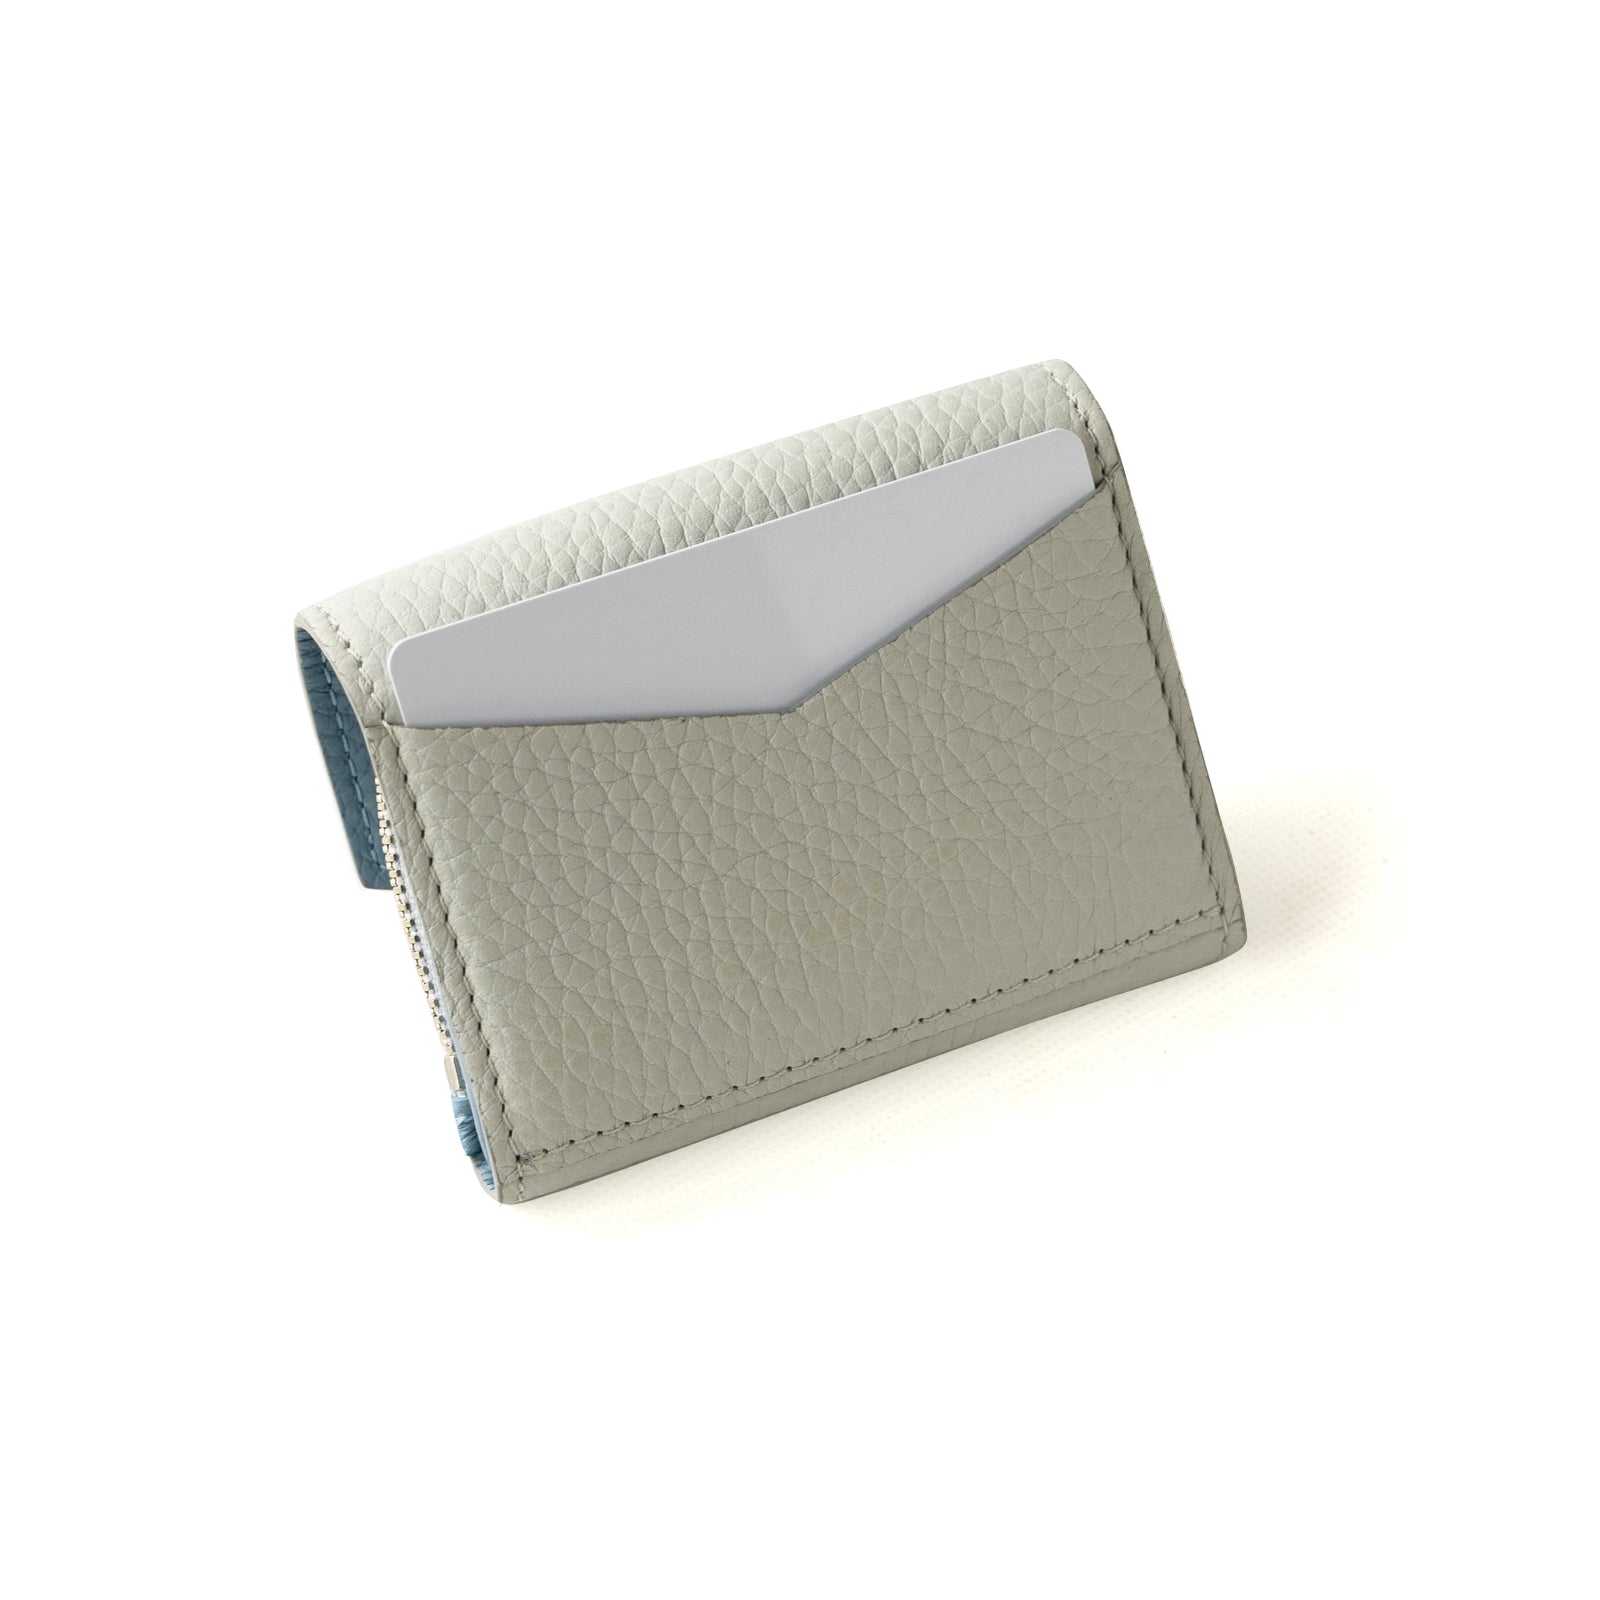 Handy Wallet Opera Taurillon Clemence / Blue Pale